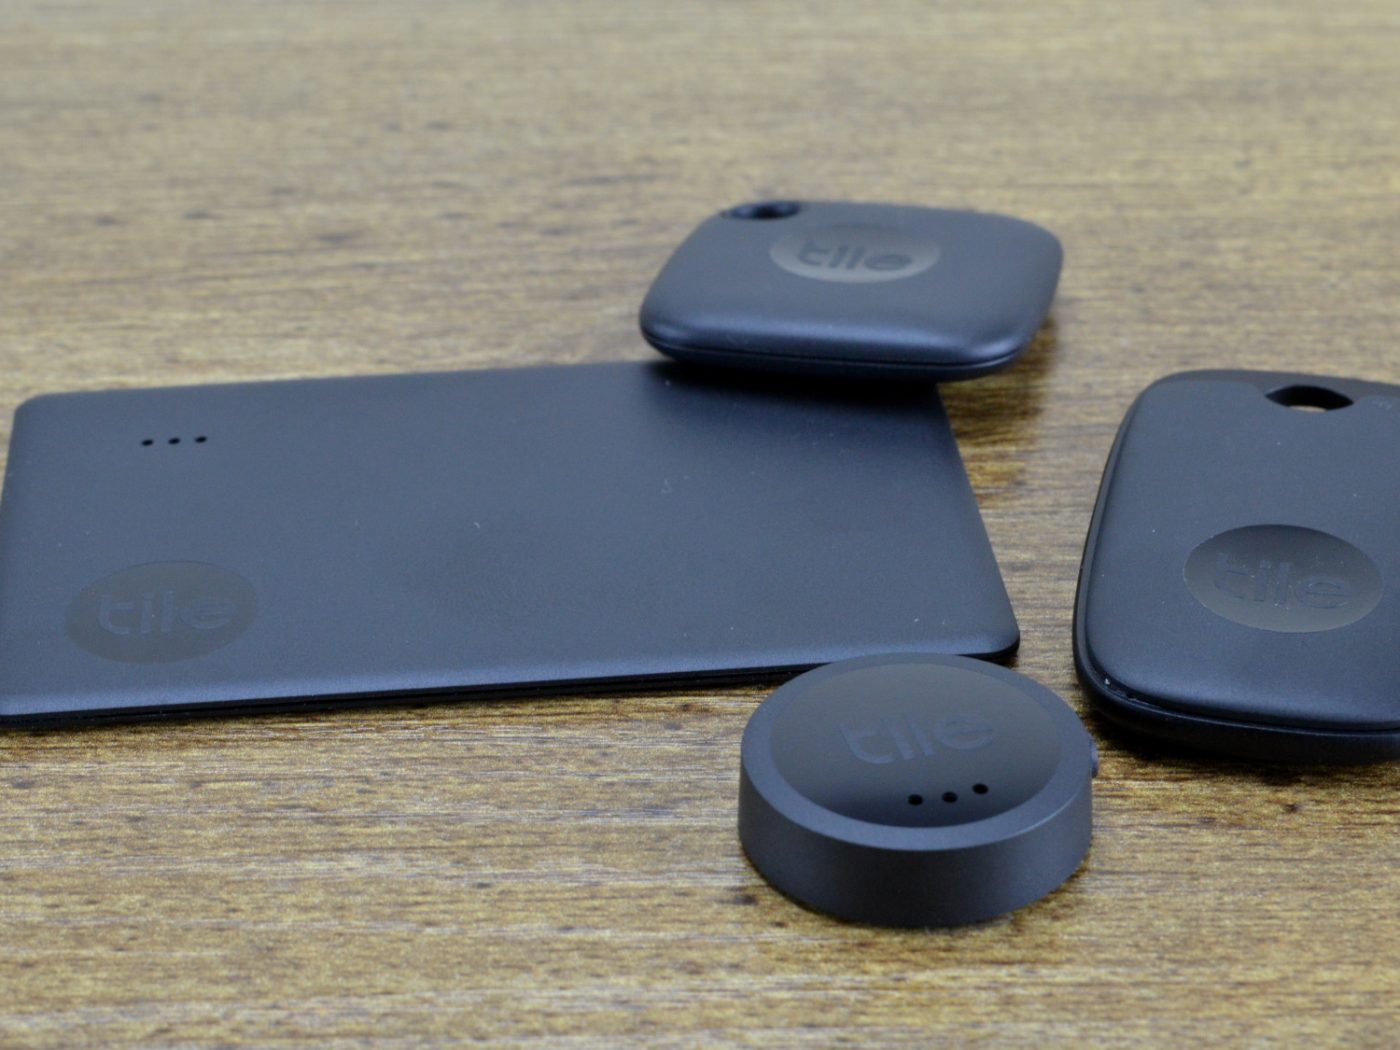 Review: Tile Mate and Slim